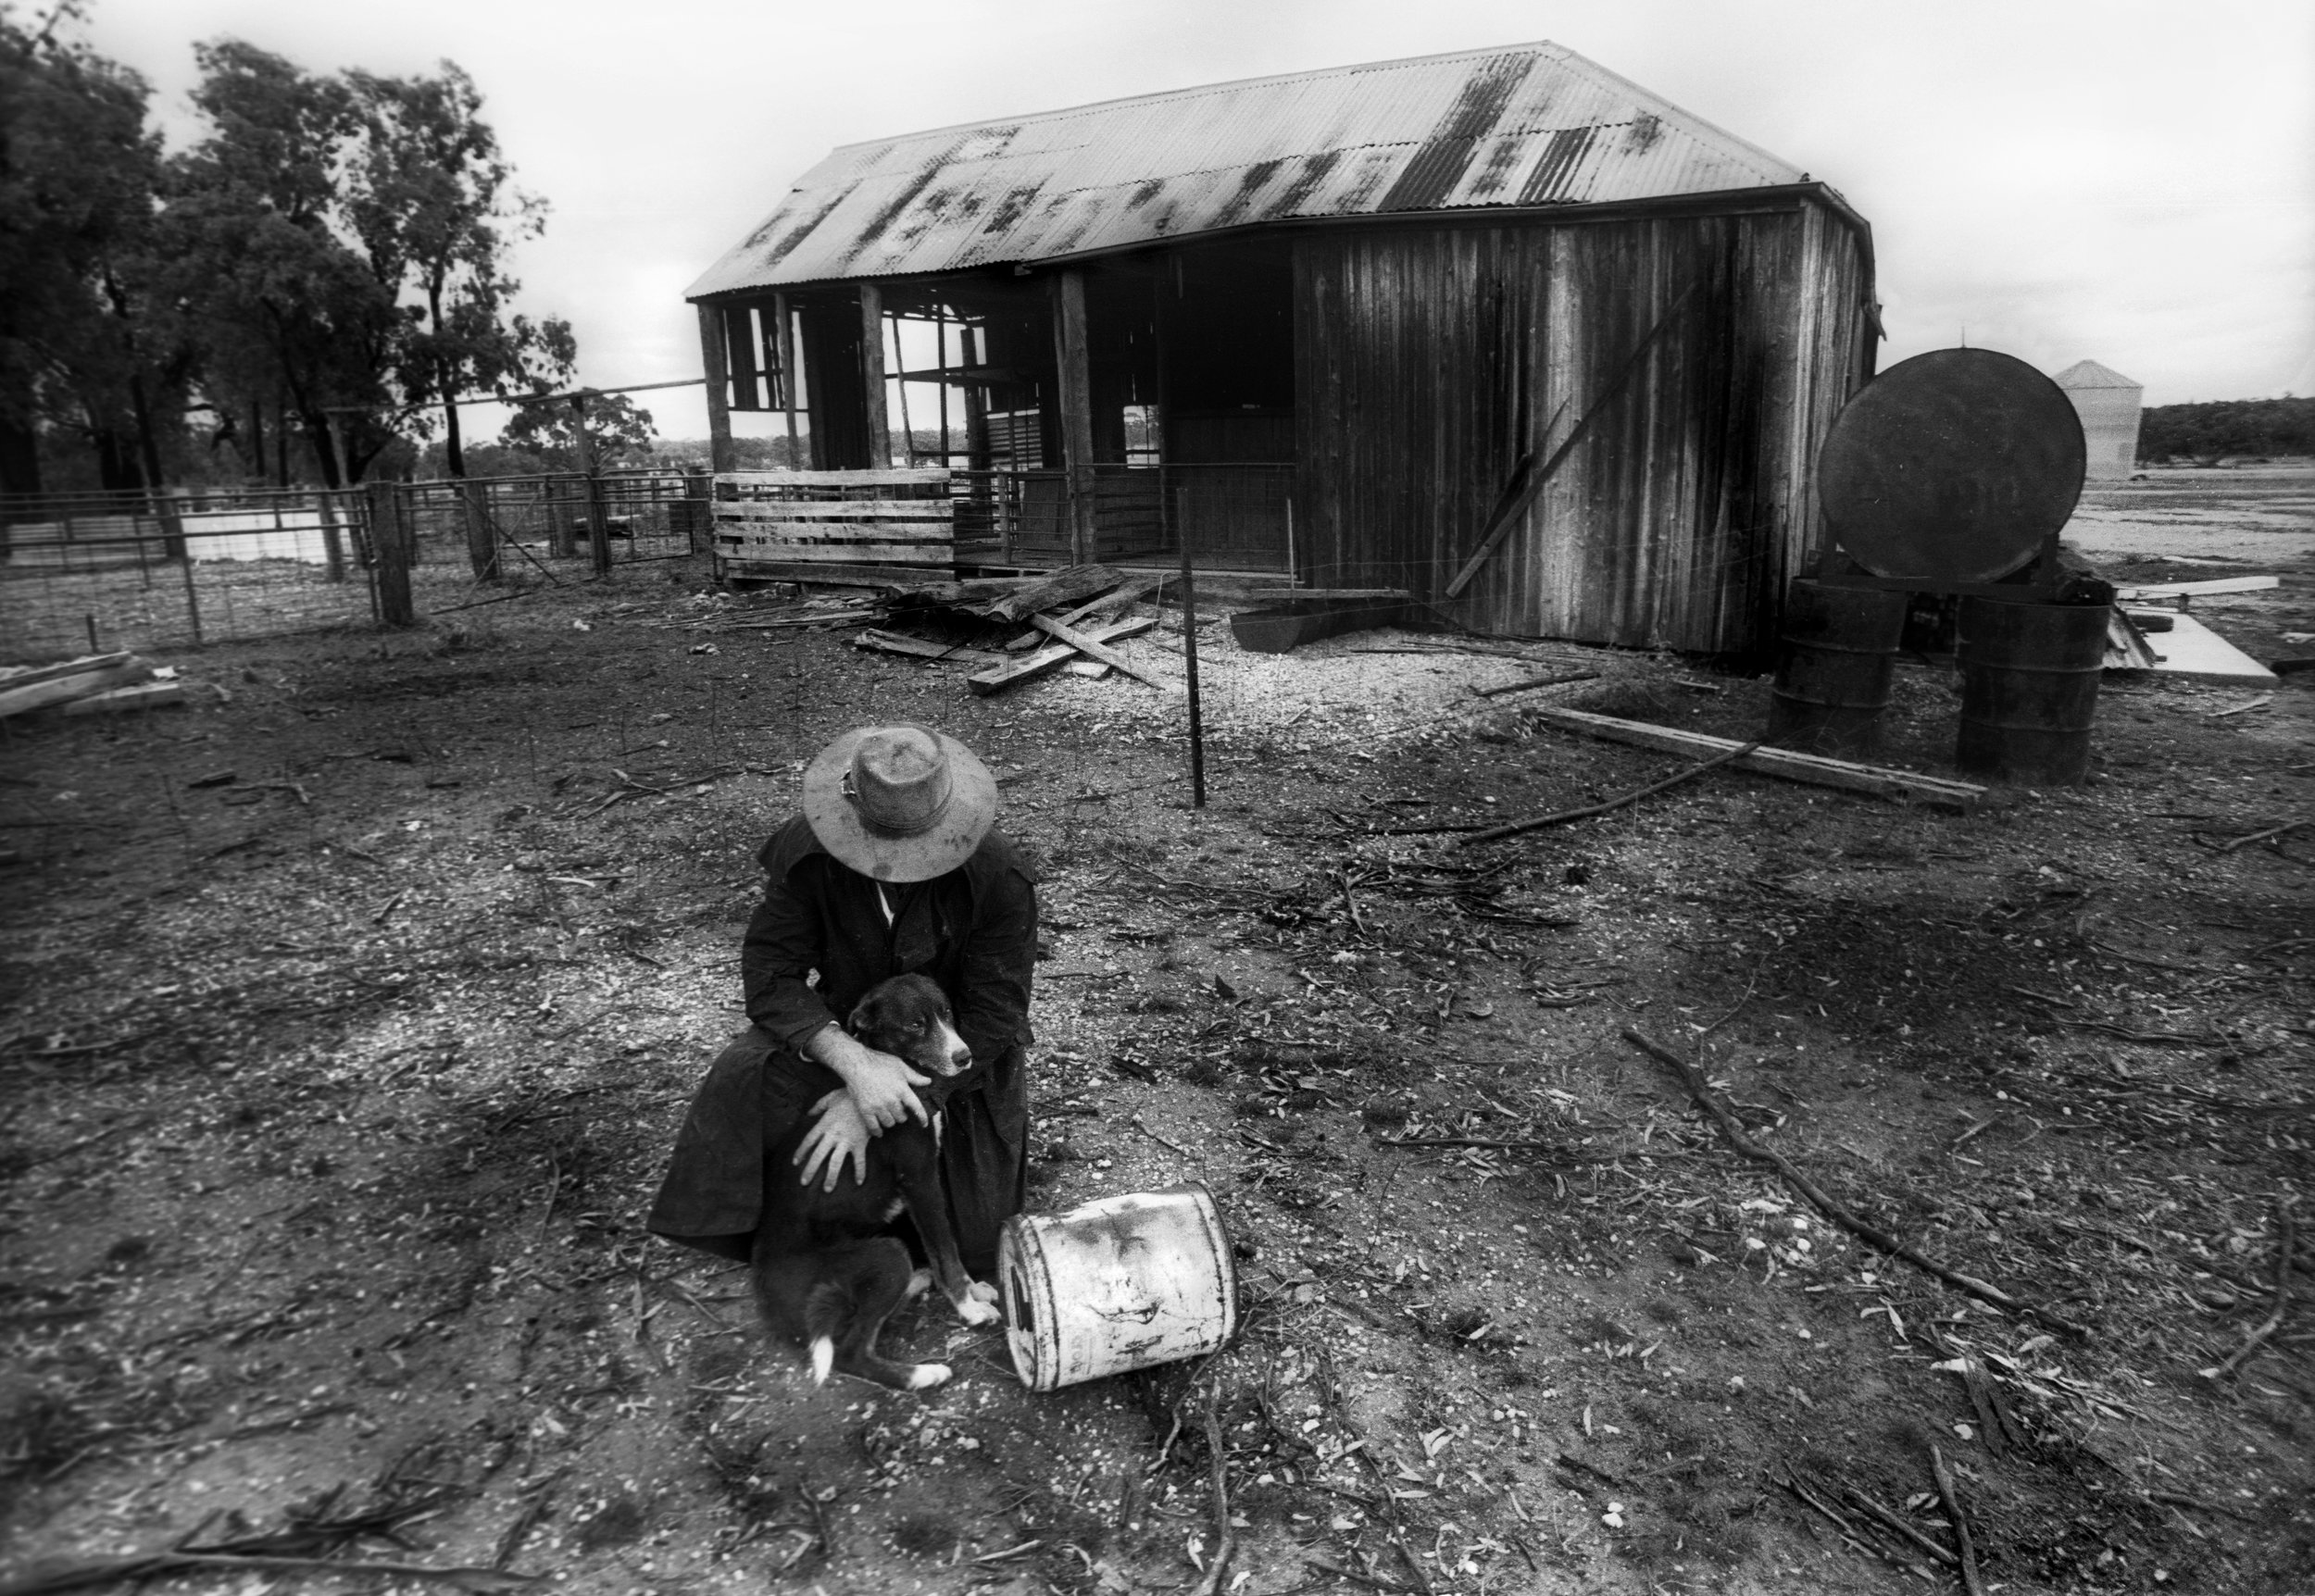  Drought stricken farmer and his dog on a sheep property near Bourke, outback NSW, Australia. 1997 